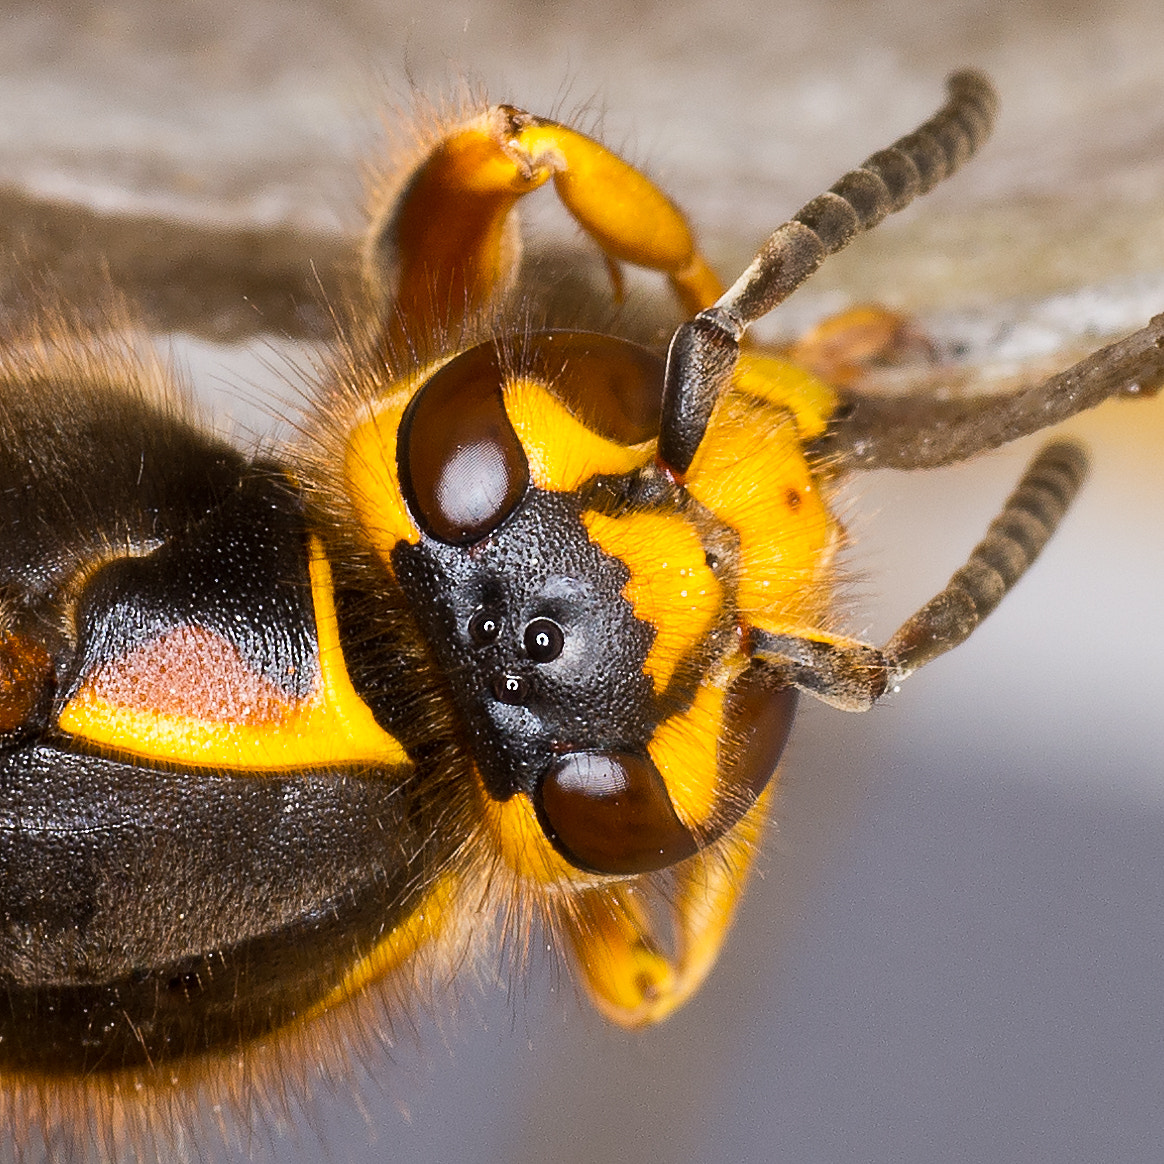 Nikon D800 + Sigma 70mm F2.8 EX DG Macro sample photo. The head of a wasp queen photography